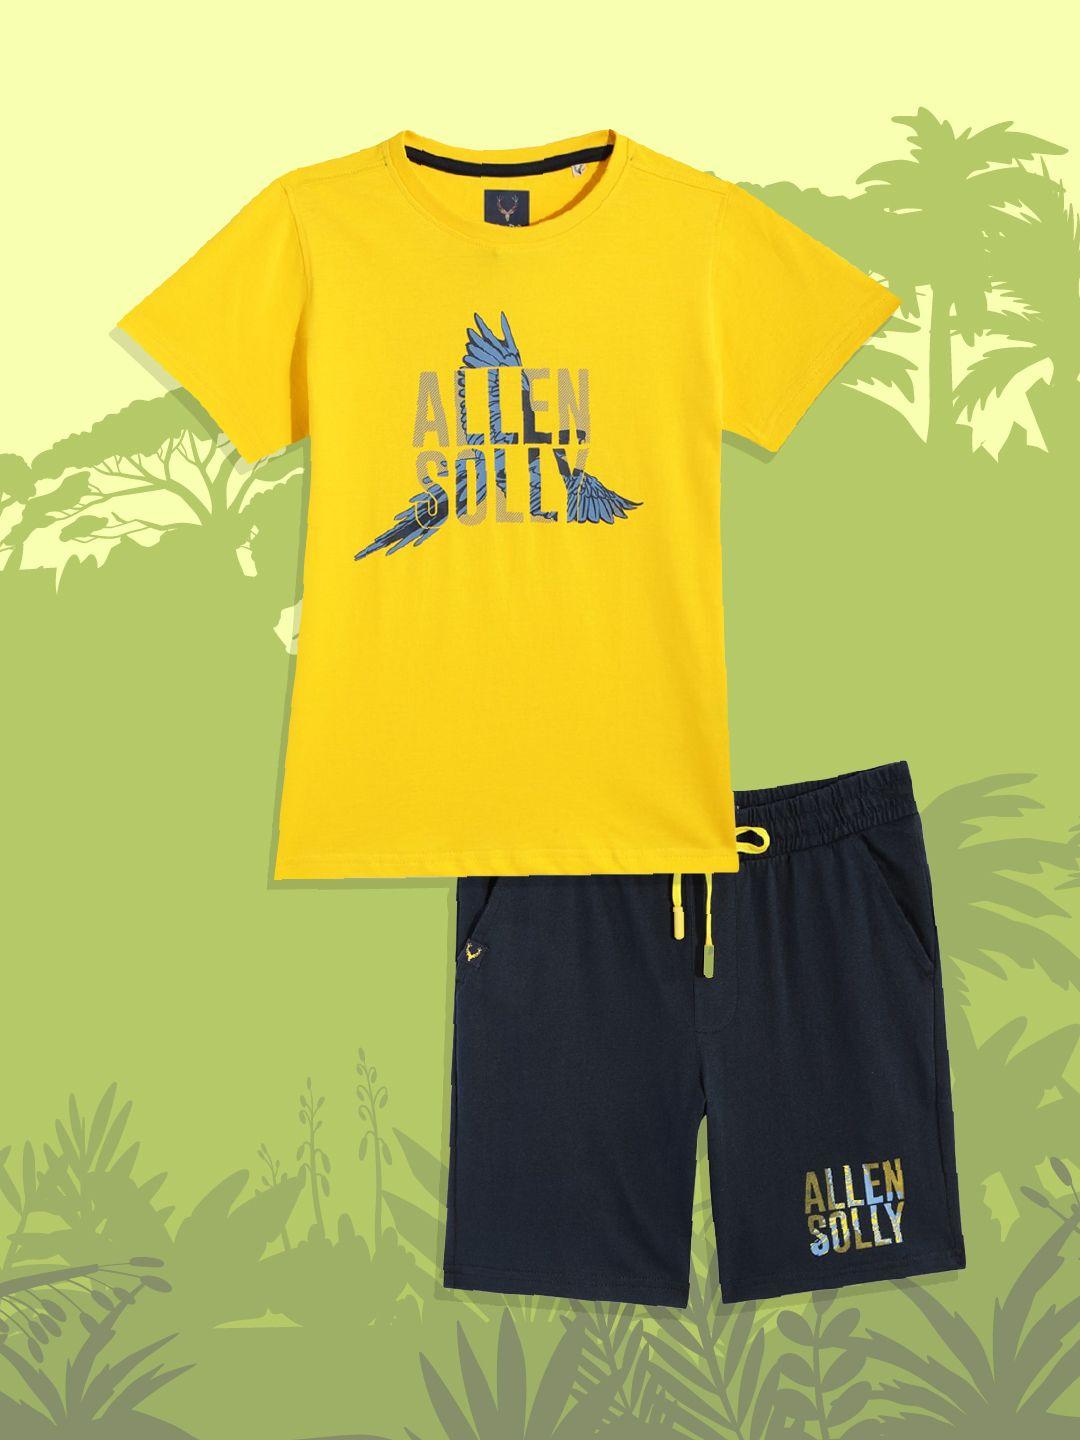 allen-solly-junior-boys-yellow-&-navy-blue-printed-pure-cotton-t-shirt-with-shorts-set